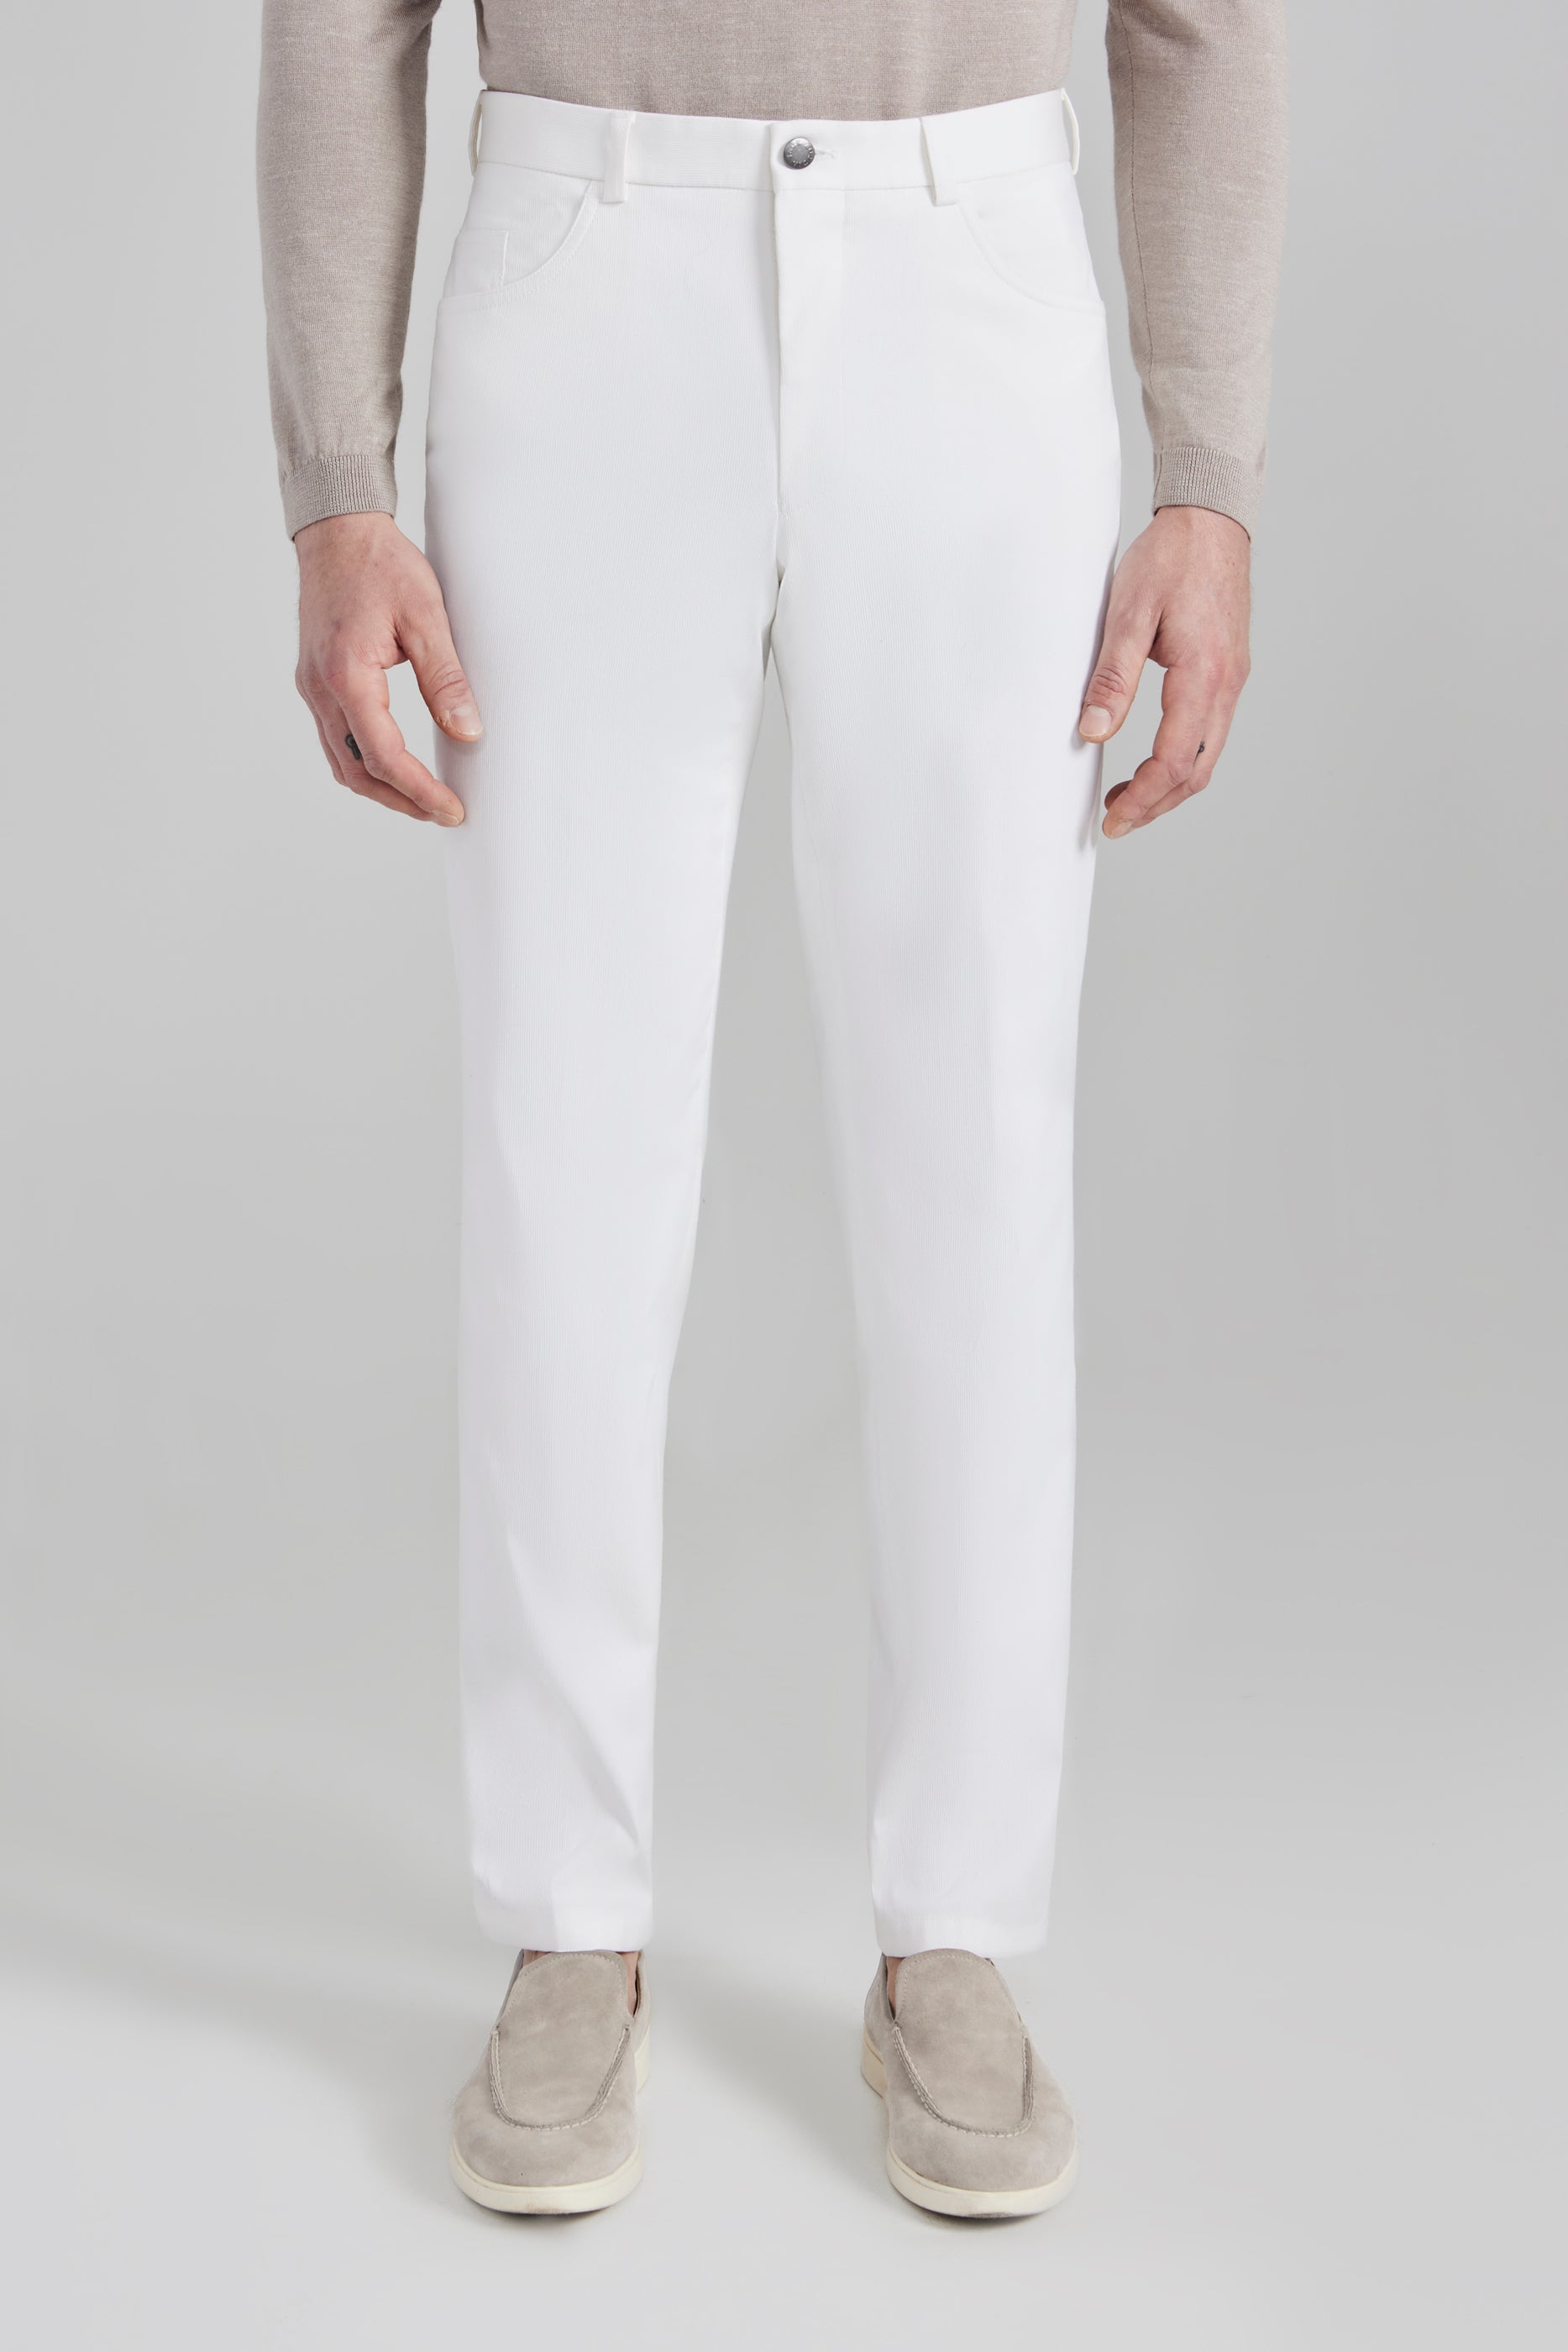 Alt view Pinfeather Sage 5-Pocket Stretch Cotton Pant in White